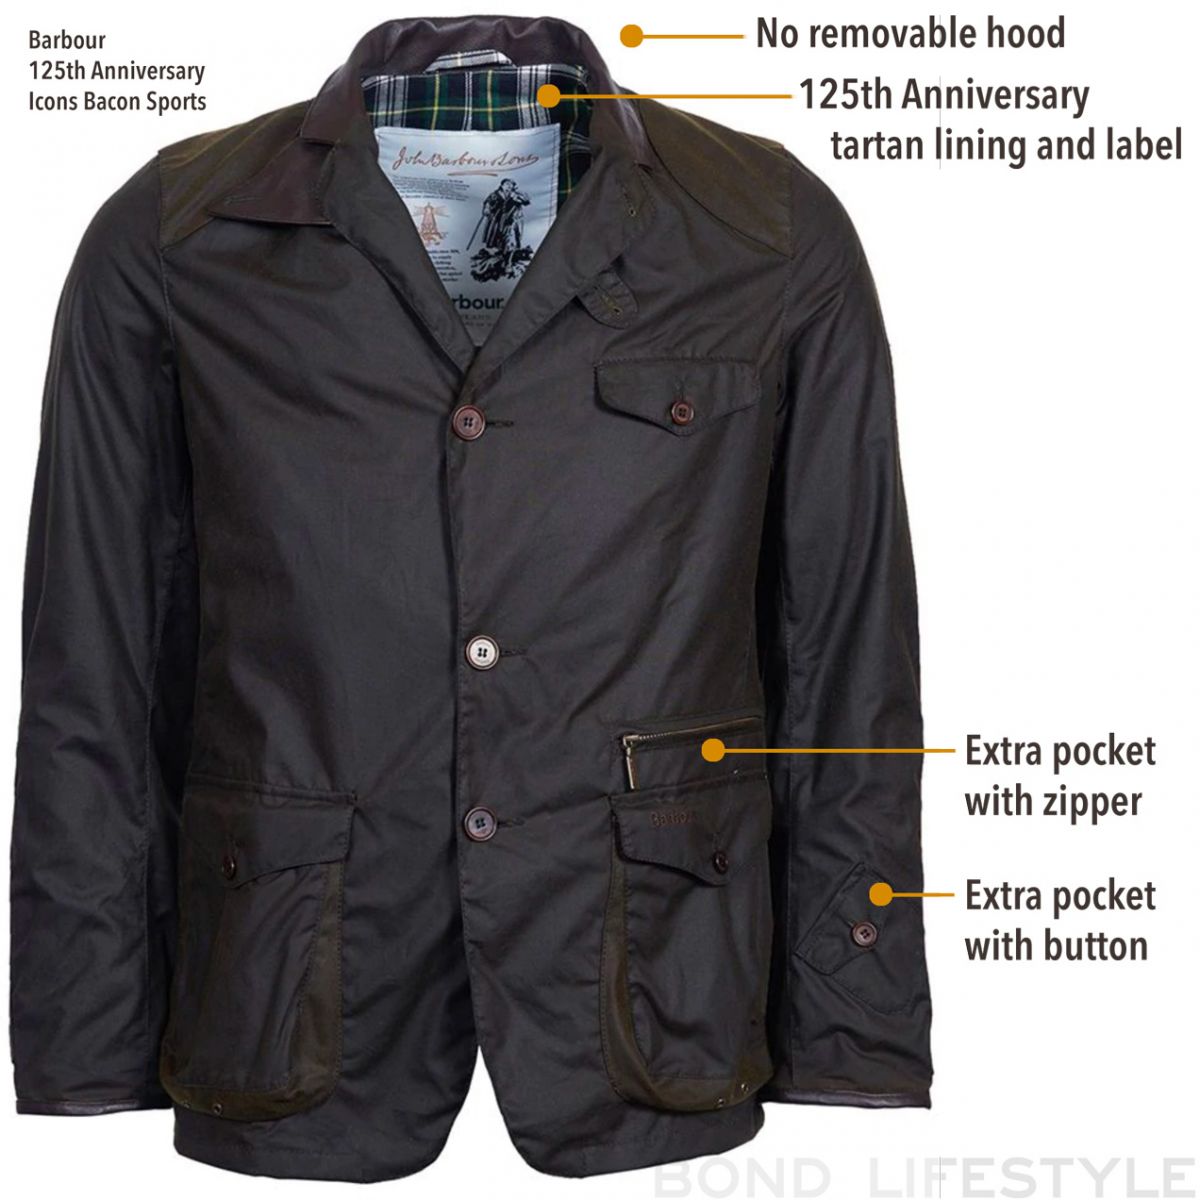 UPDATED 2022: Comparing the Barbour Beacon Heritage X To Ki To 